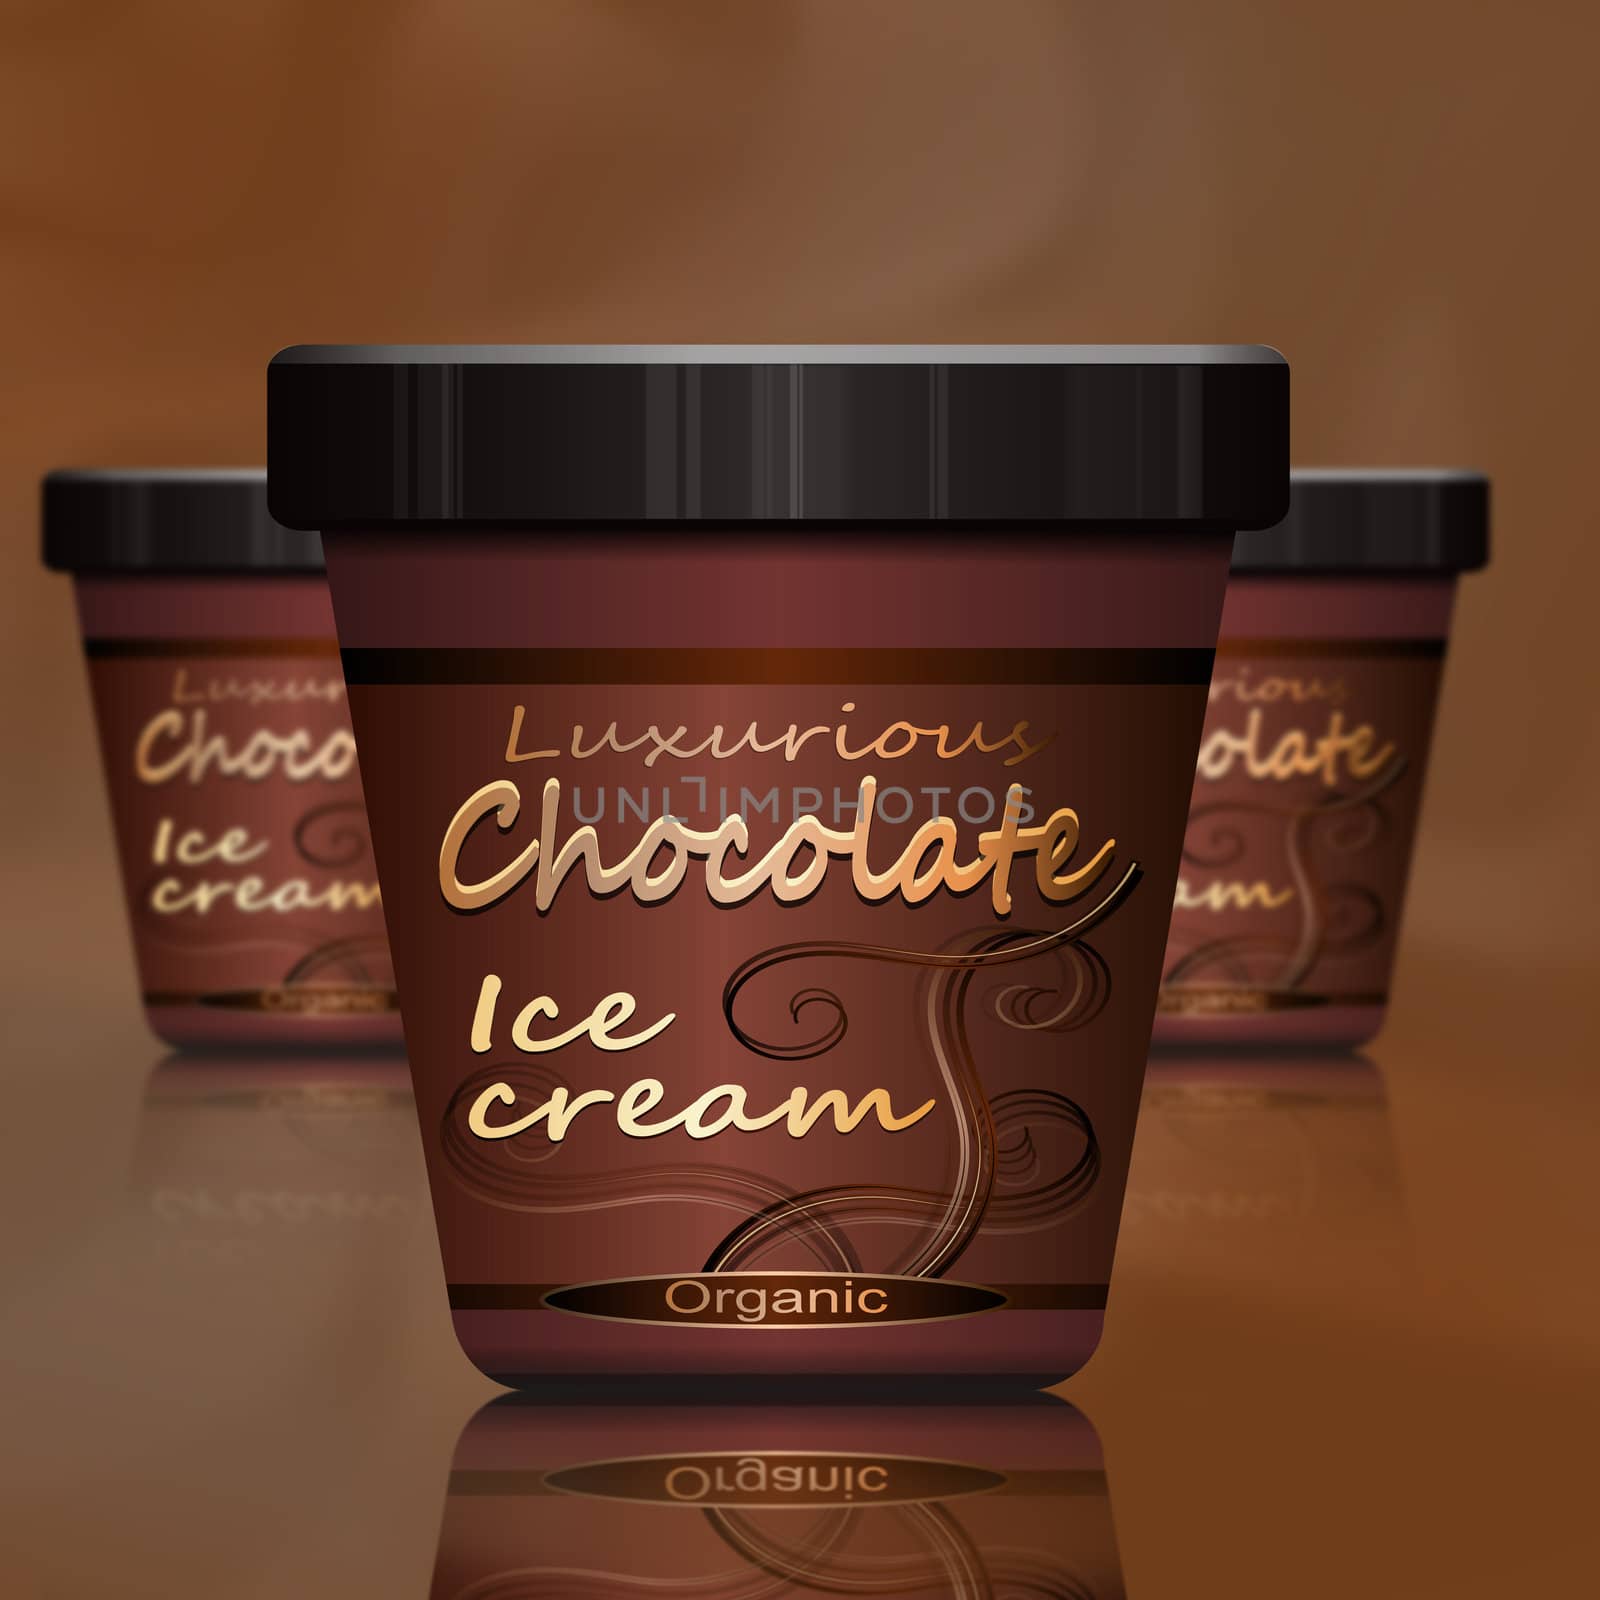 Illustration depicting three chocolate ice cream containers arranged over warm brown shades. Foreground container in focus.